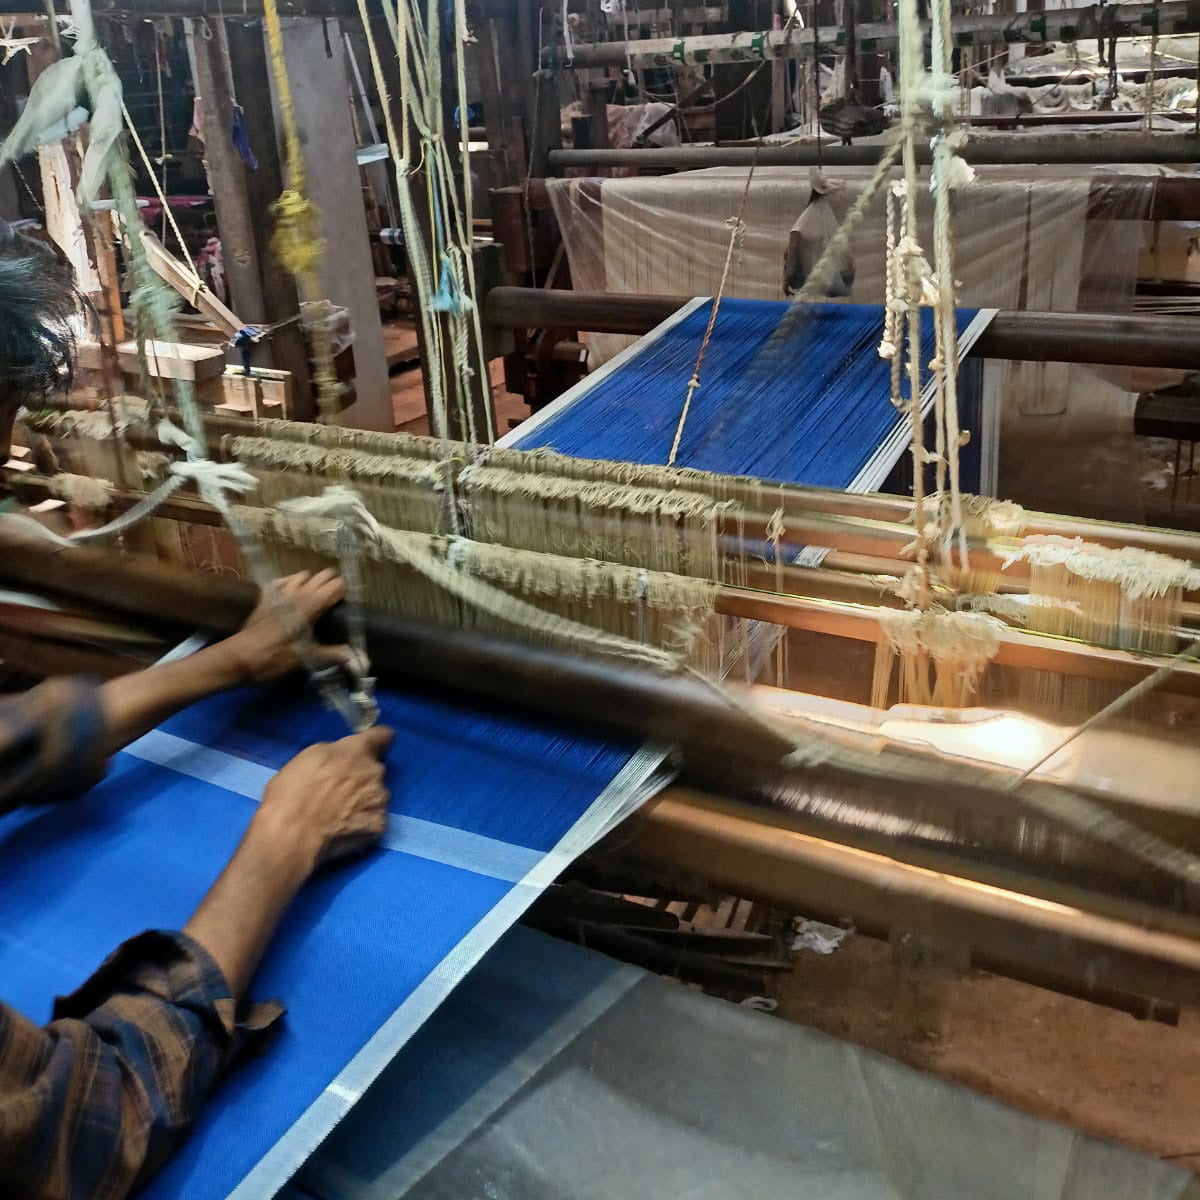 Image of M+A Colorblock Napkins in the colorway Perfect Day/Kora being woven on a wooden handloom.